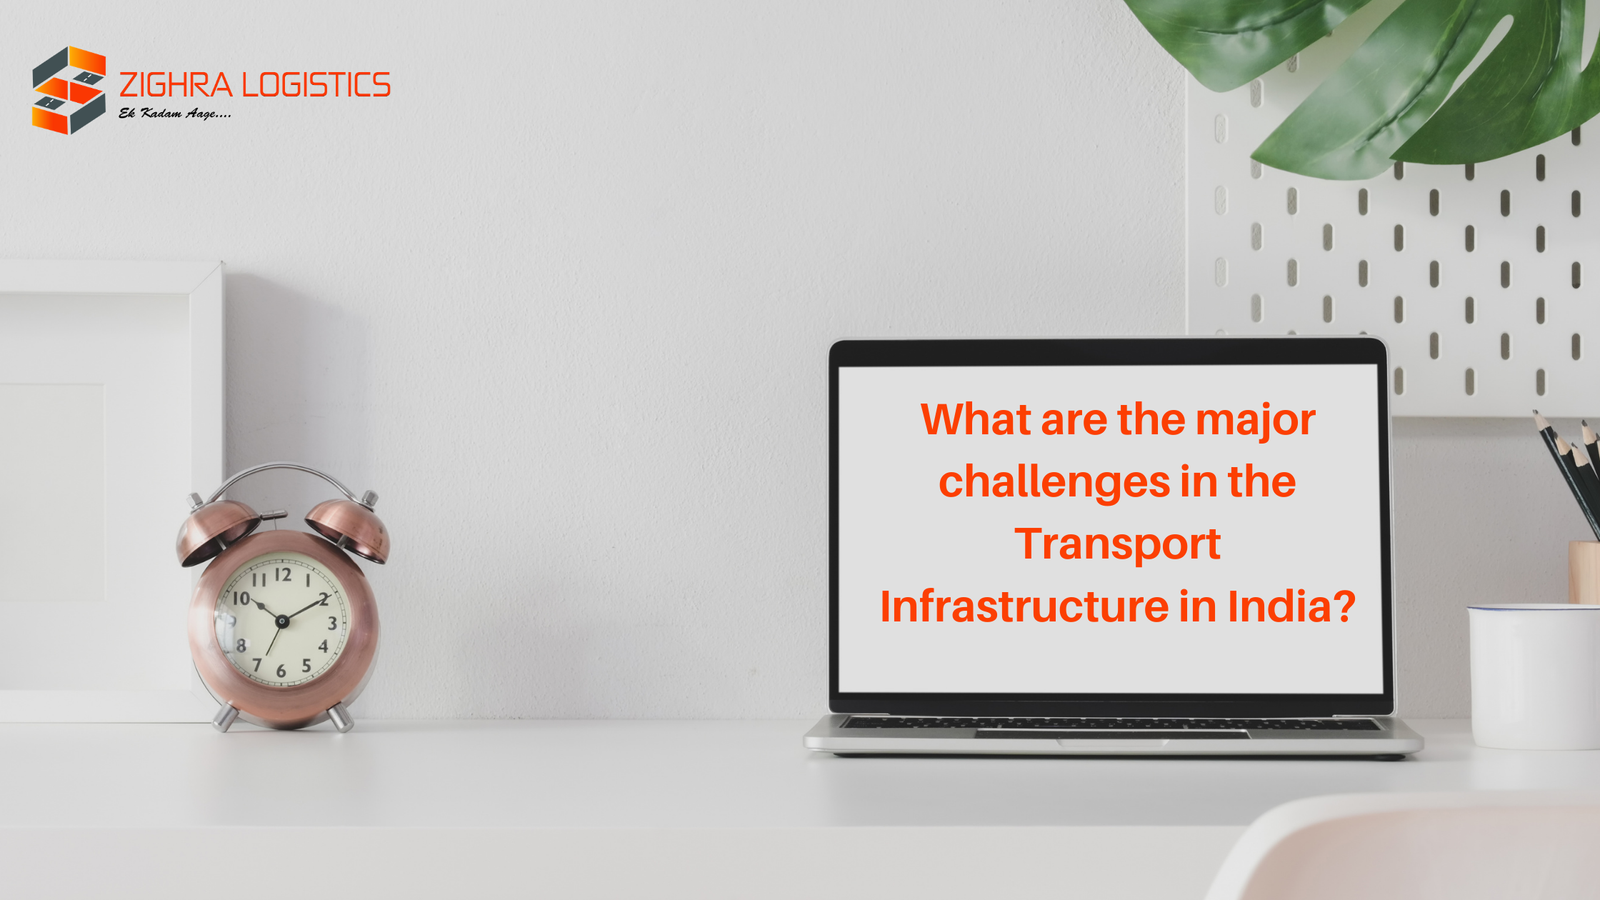 What are the major challenges in the Transport Infrastructure in India?